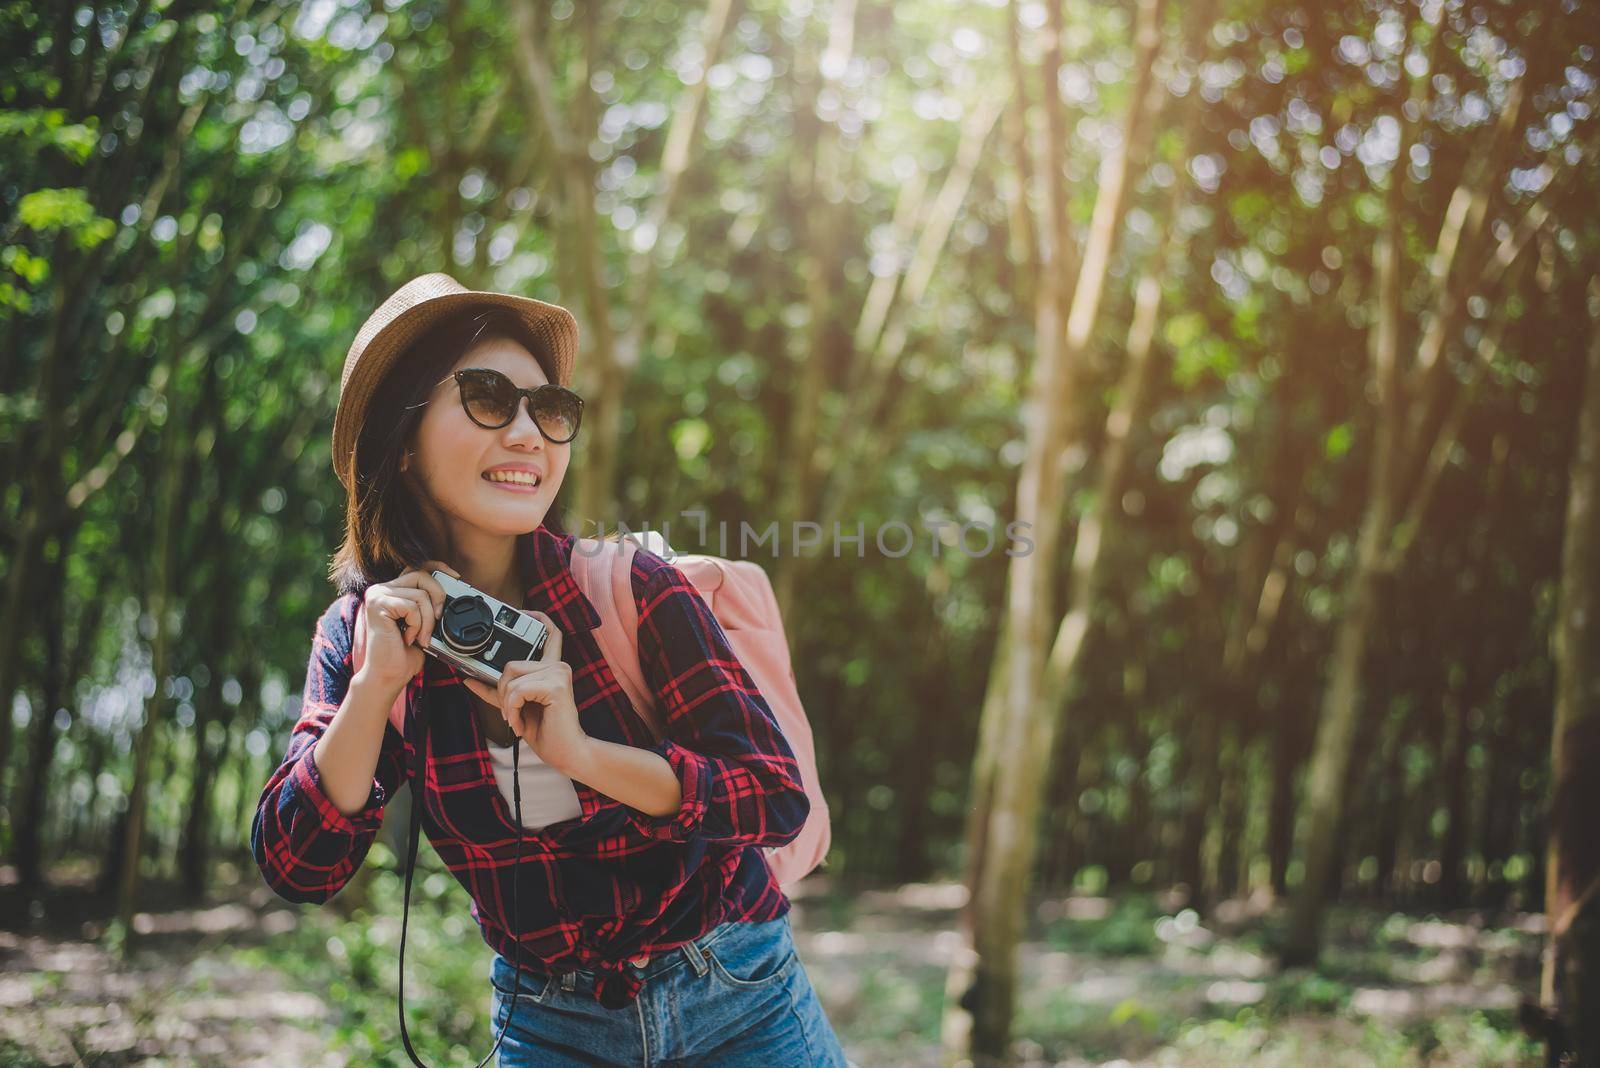 Beauty Asian woman smiling lifestyle portrait of pretty young woman having fun in outdoors summer with digital camera. Traveling of photographer concept. Hipster style and Solo woman theme. by MiniStocker